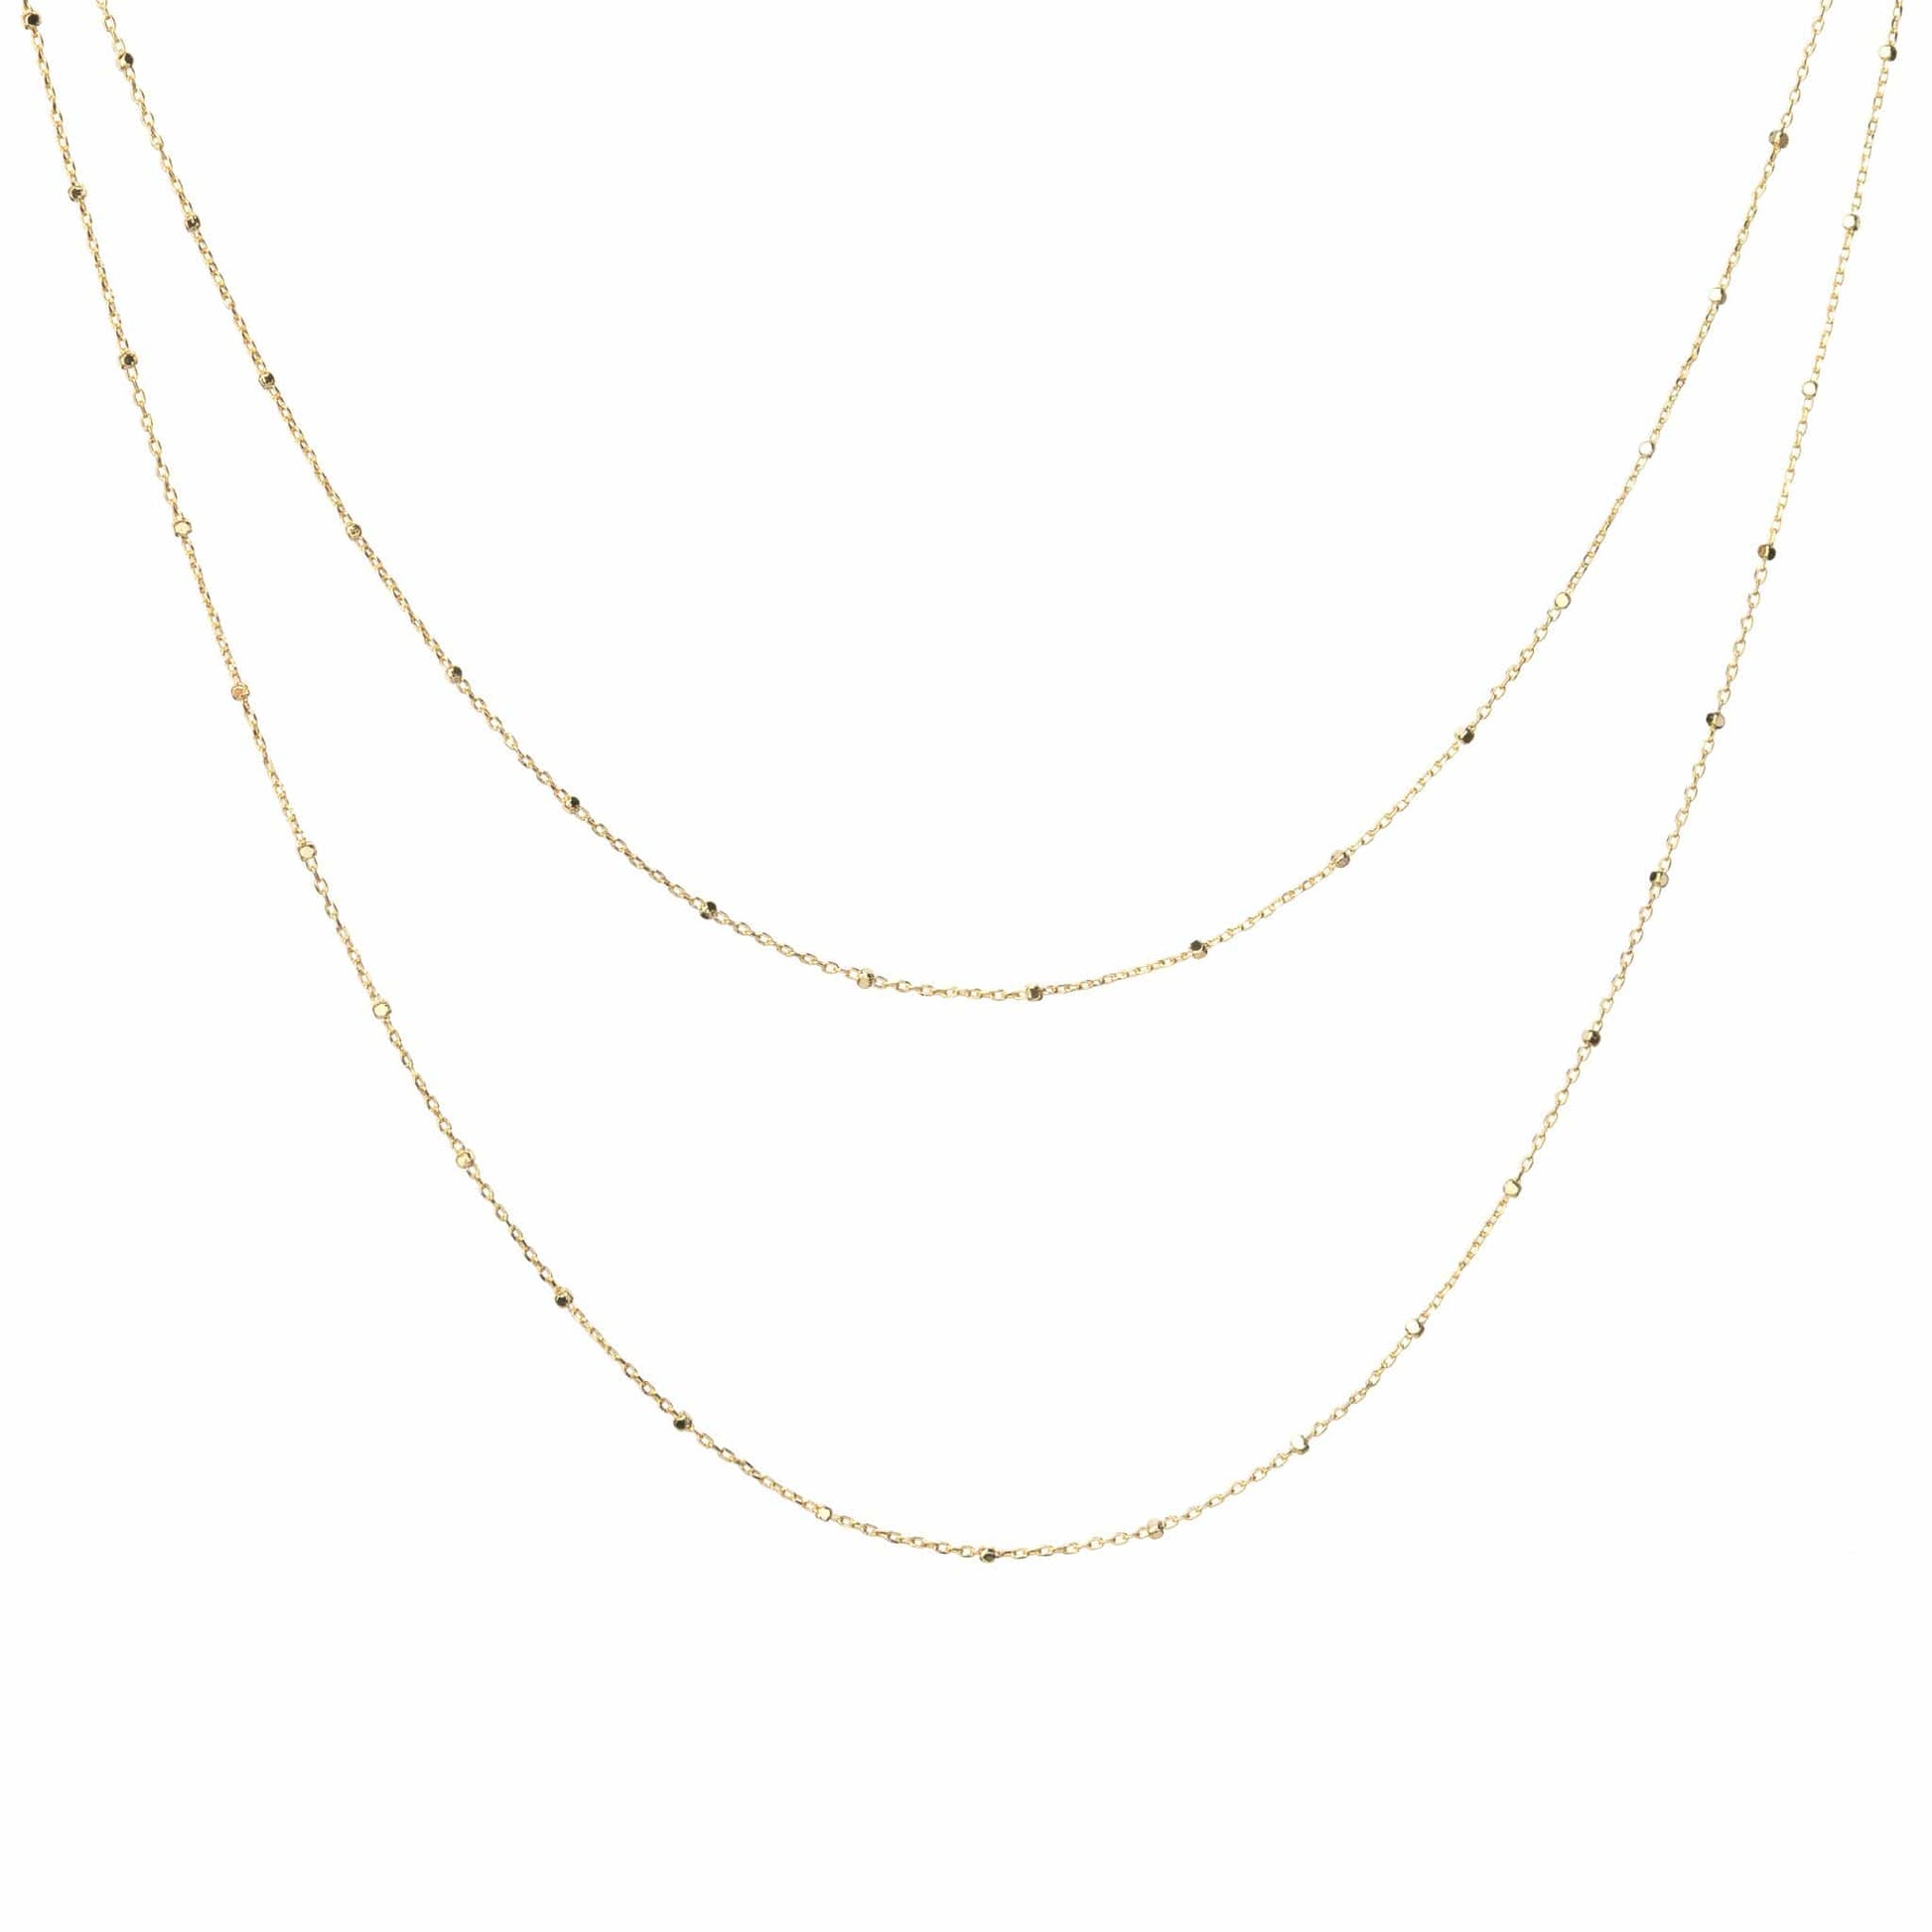 Multi layer gold beaded chain